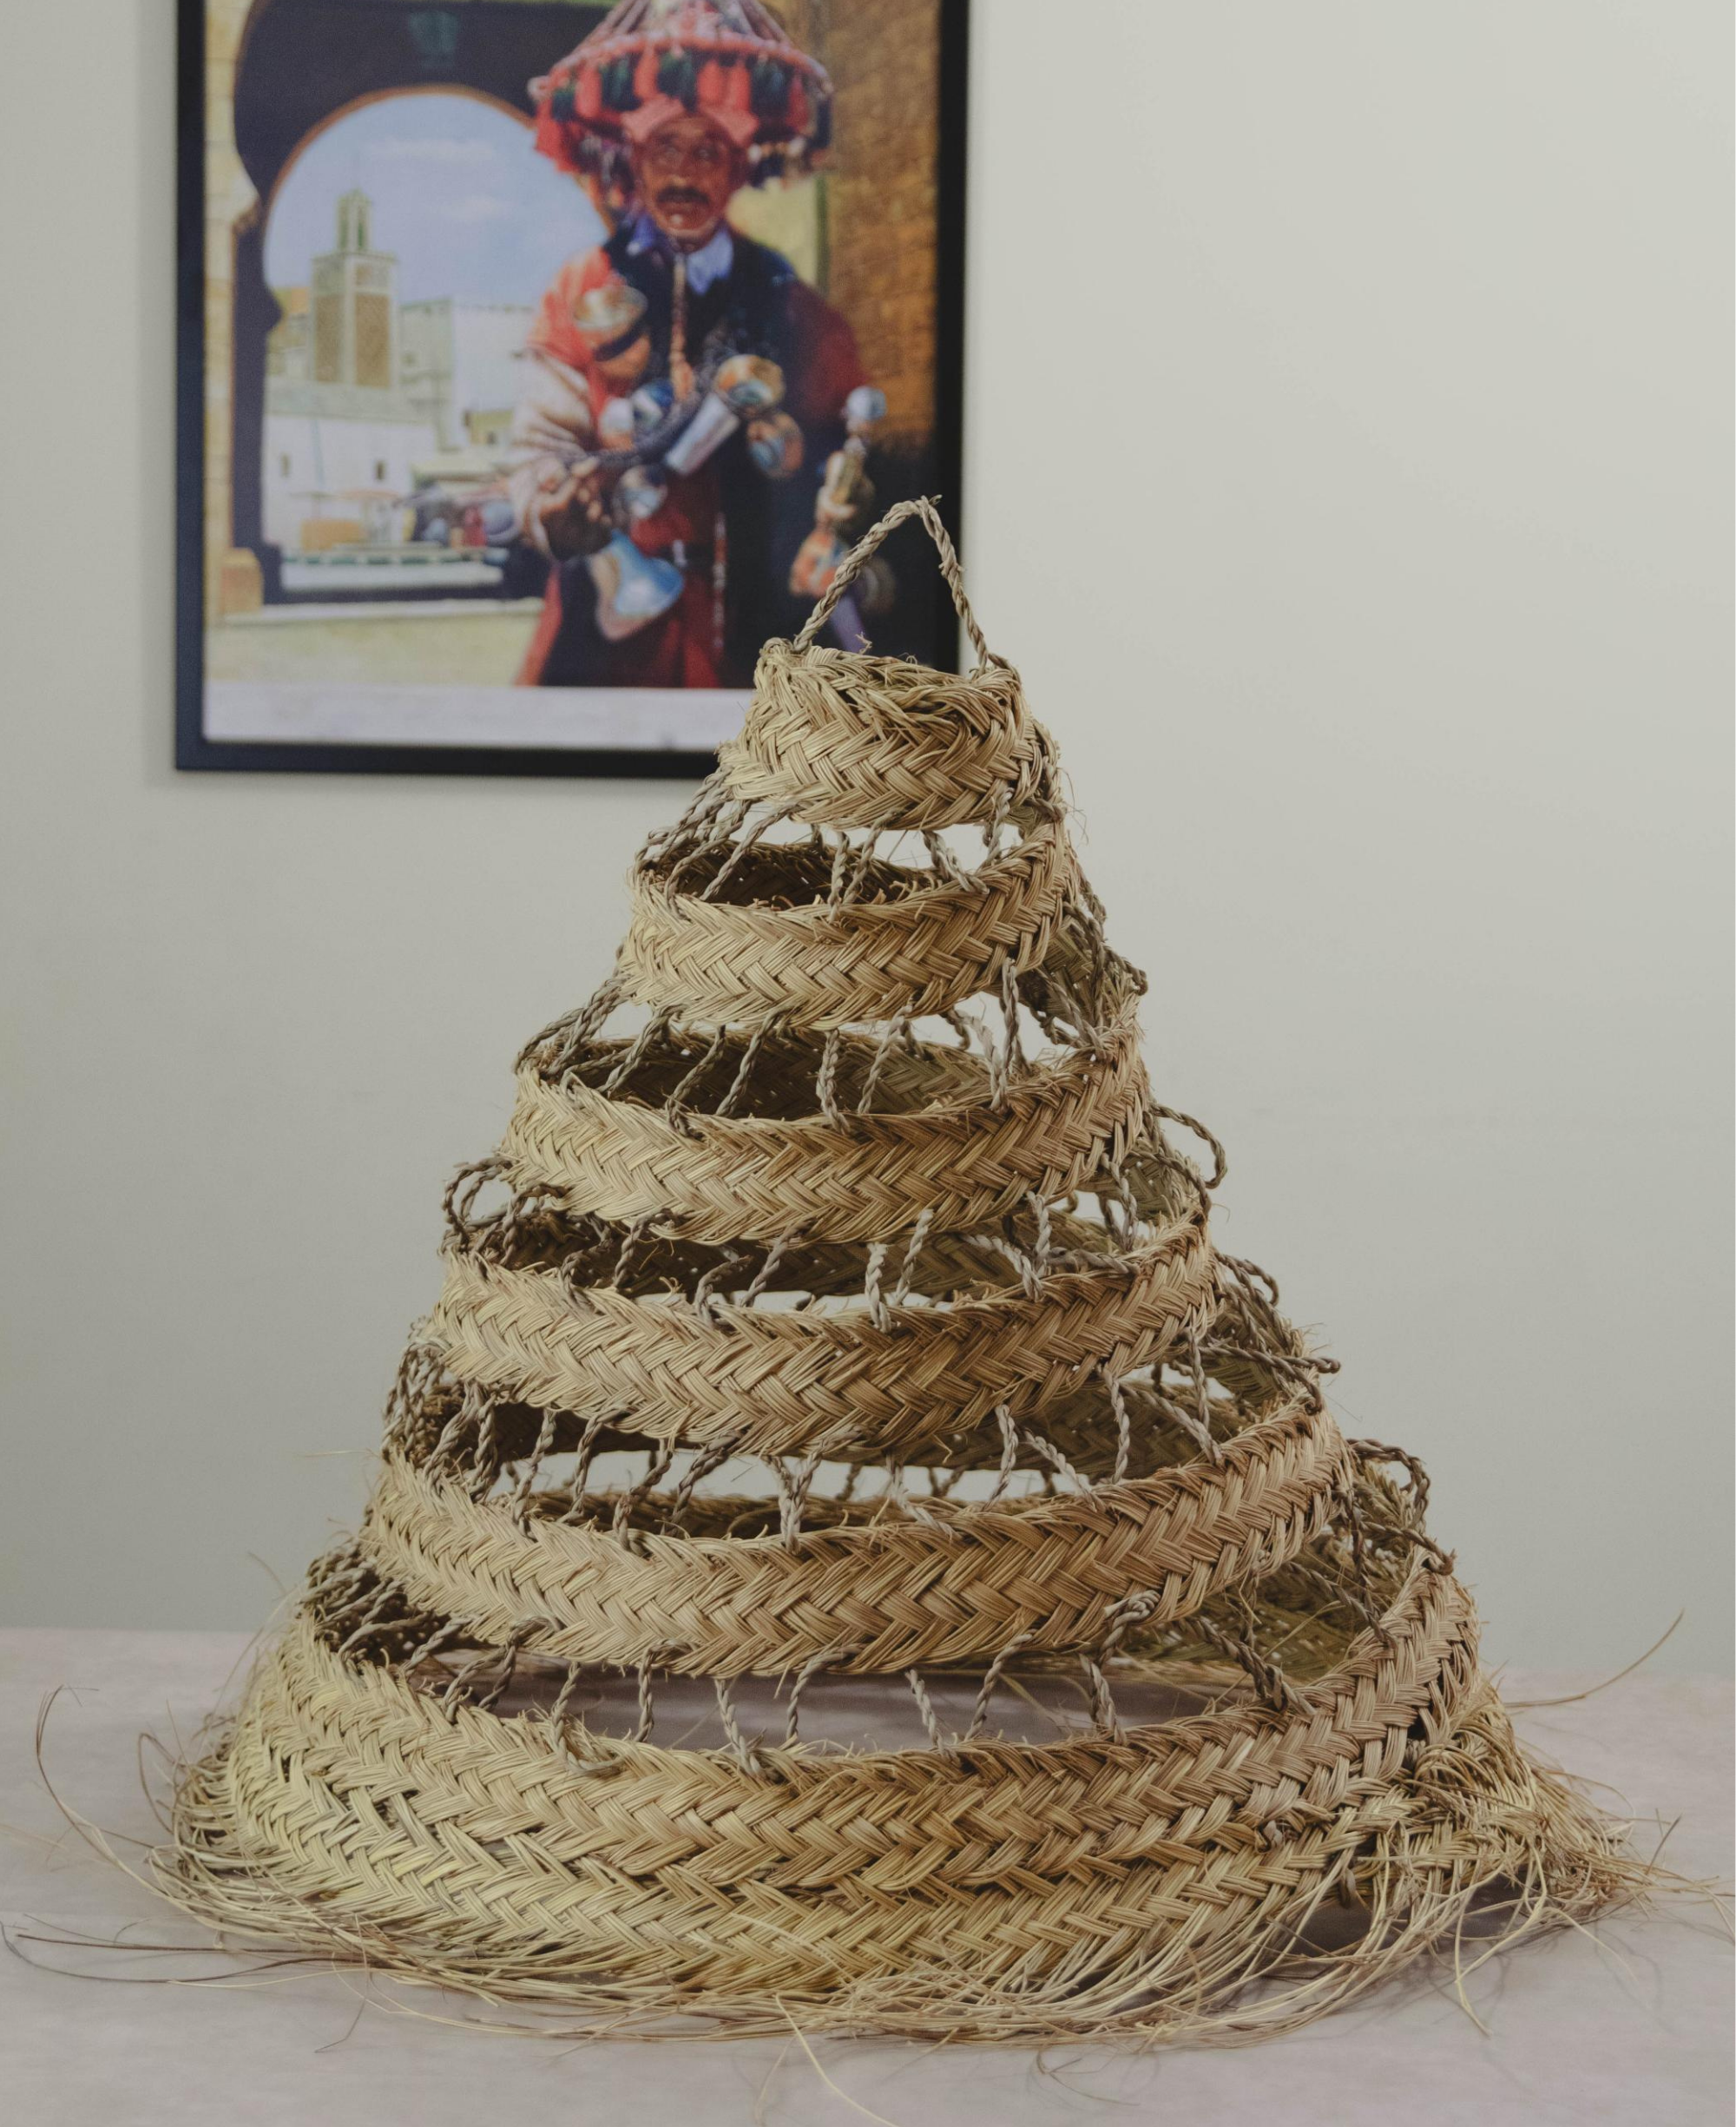 Moroccan Suspension Cone in Openwork Doum Angel Hair Lampshade - Doum Cone Lamp Wicker Shades with Fringes - Bohemian Straw Pendant